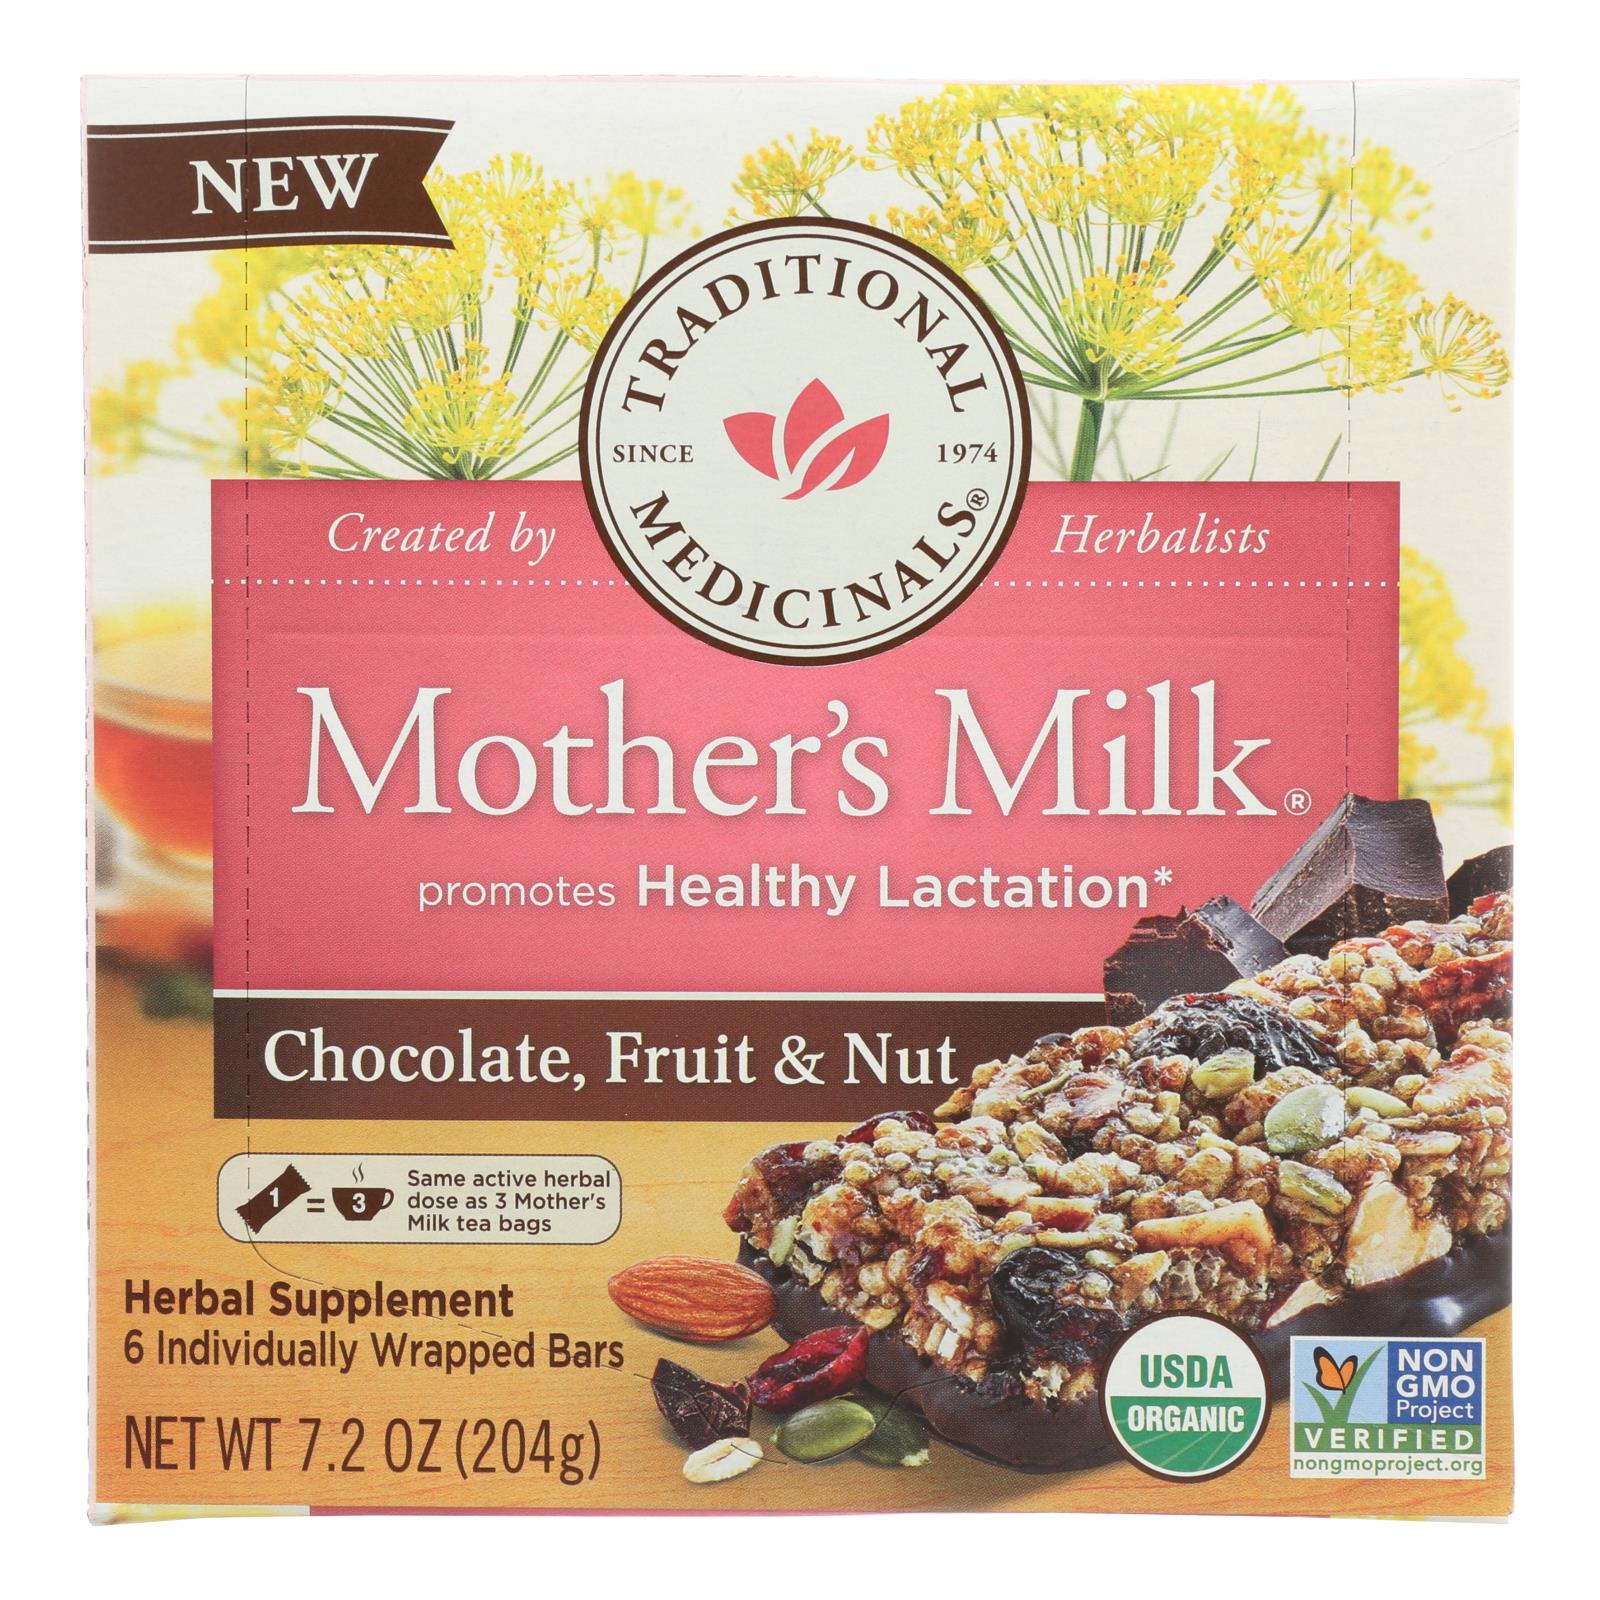 Traditional Medicinals Mother's Milk Chocolate, Fruit & Nut Herbal Supplement - 1 Each - 7.2 OZ